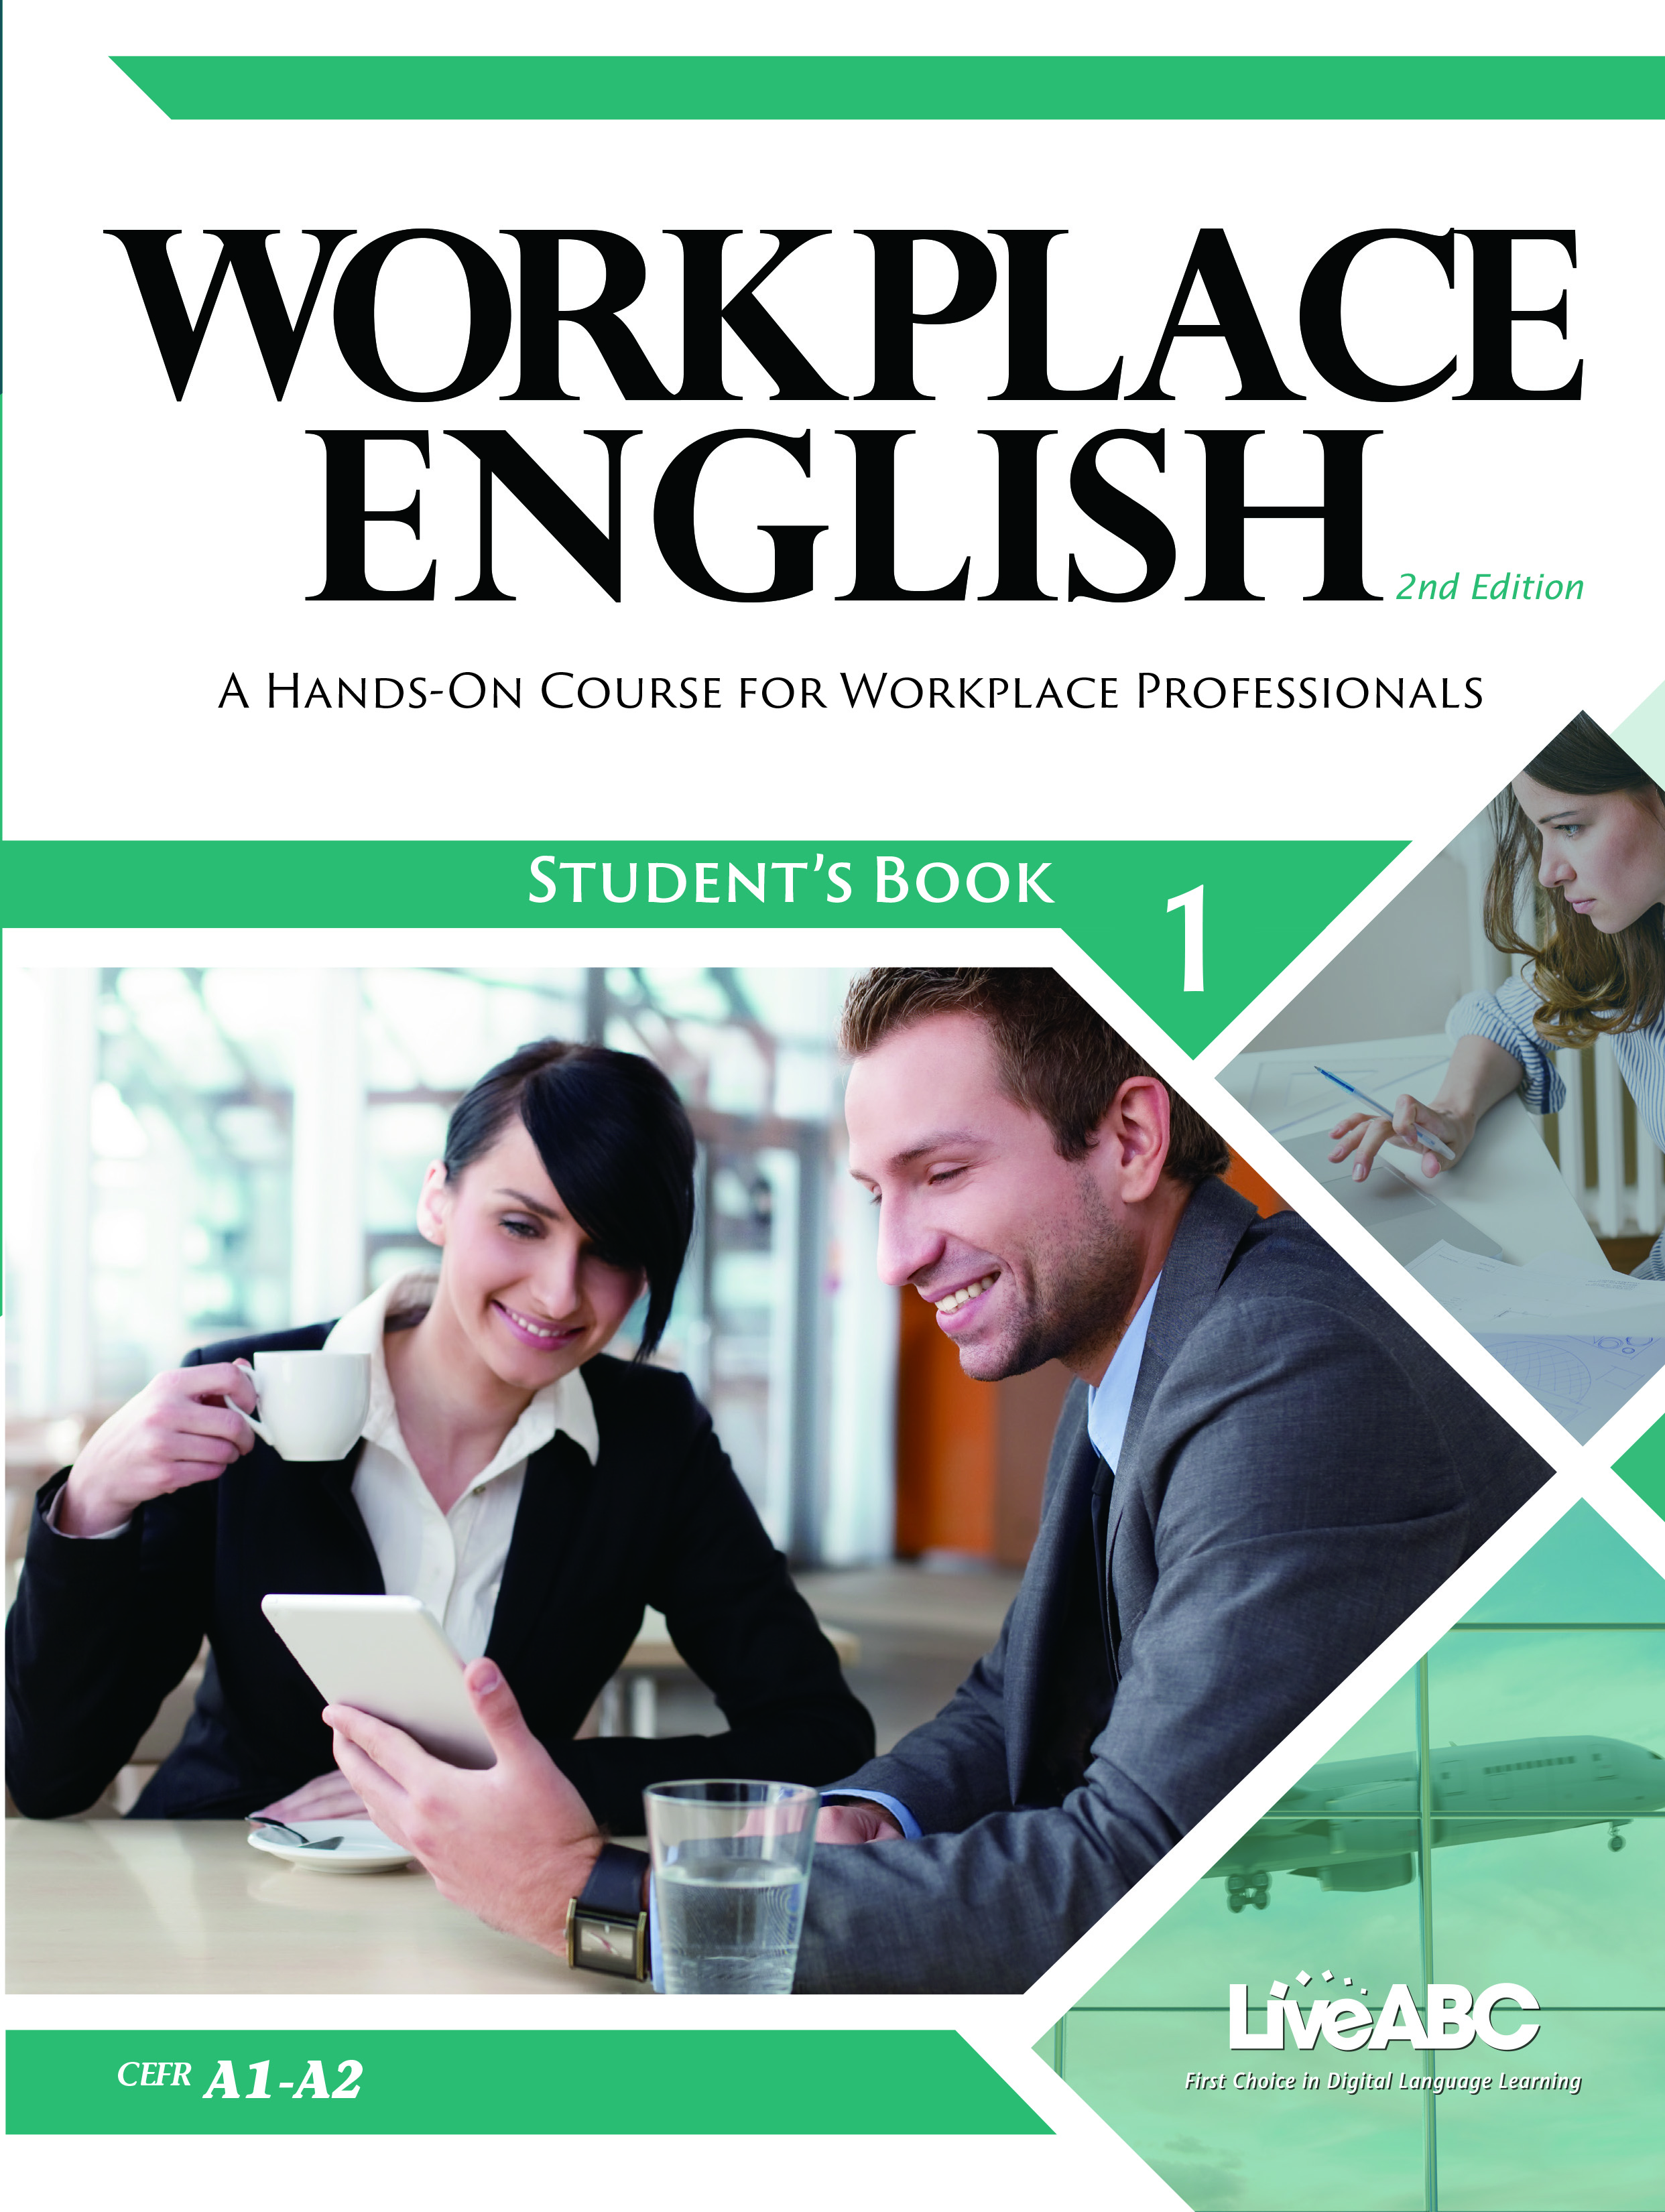 Workplace 1 cover